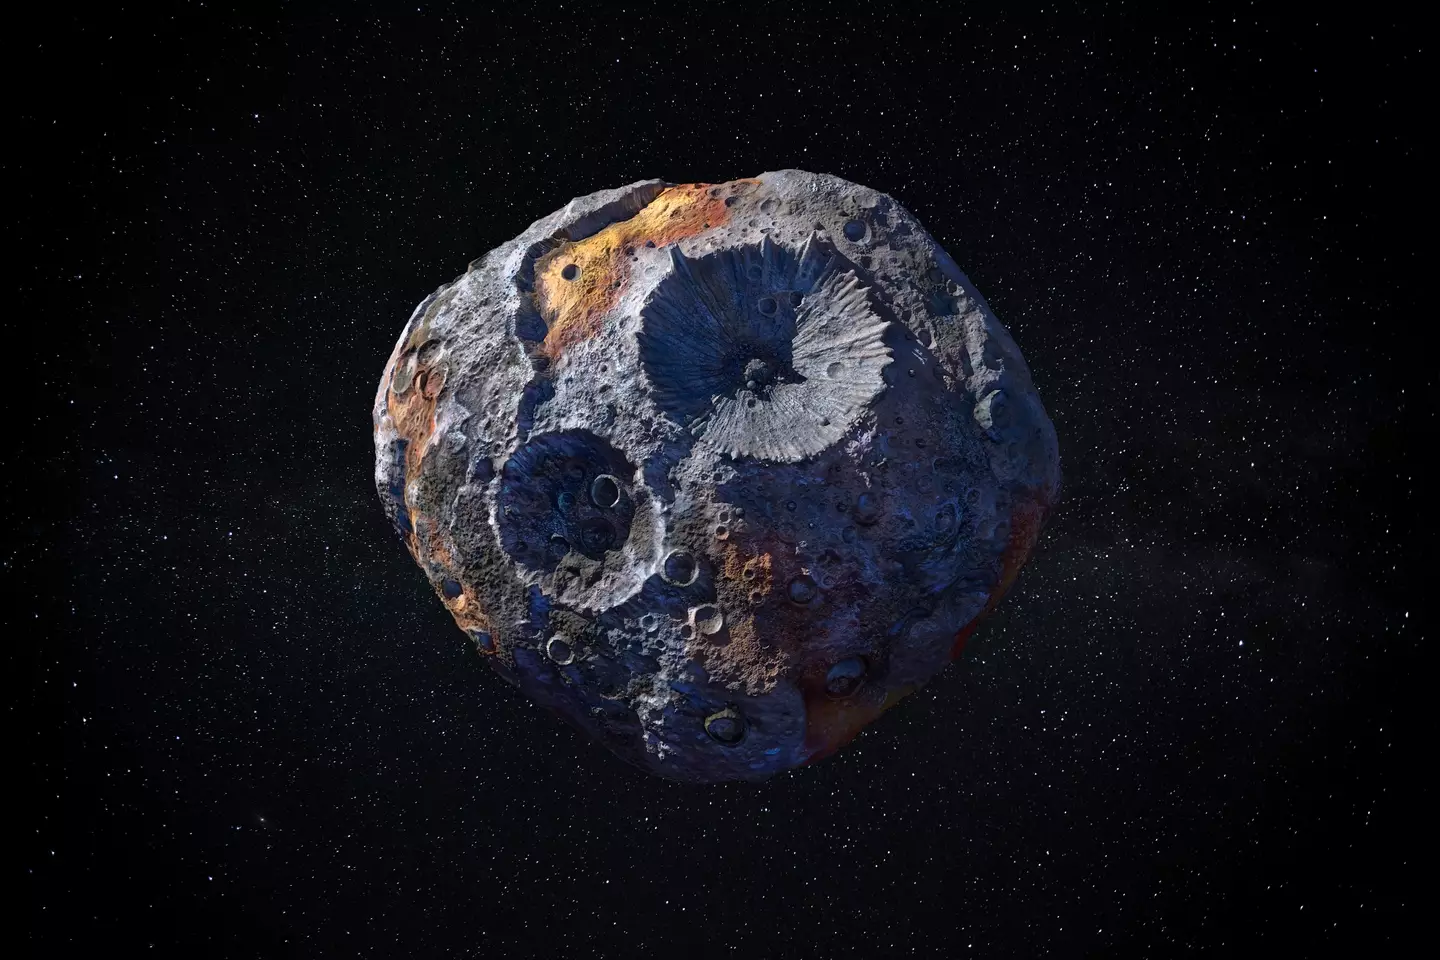 The asteroid is said to be the 'world's largest'.